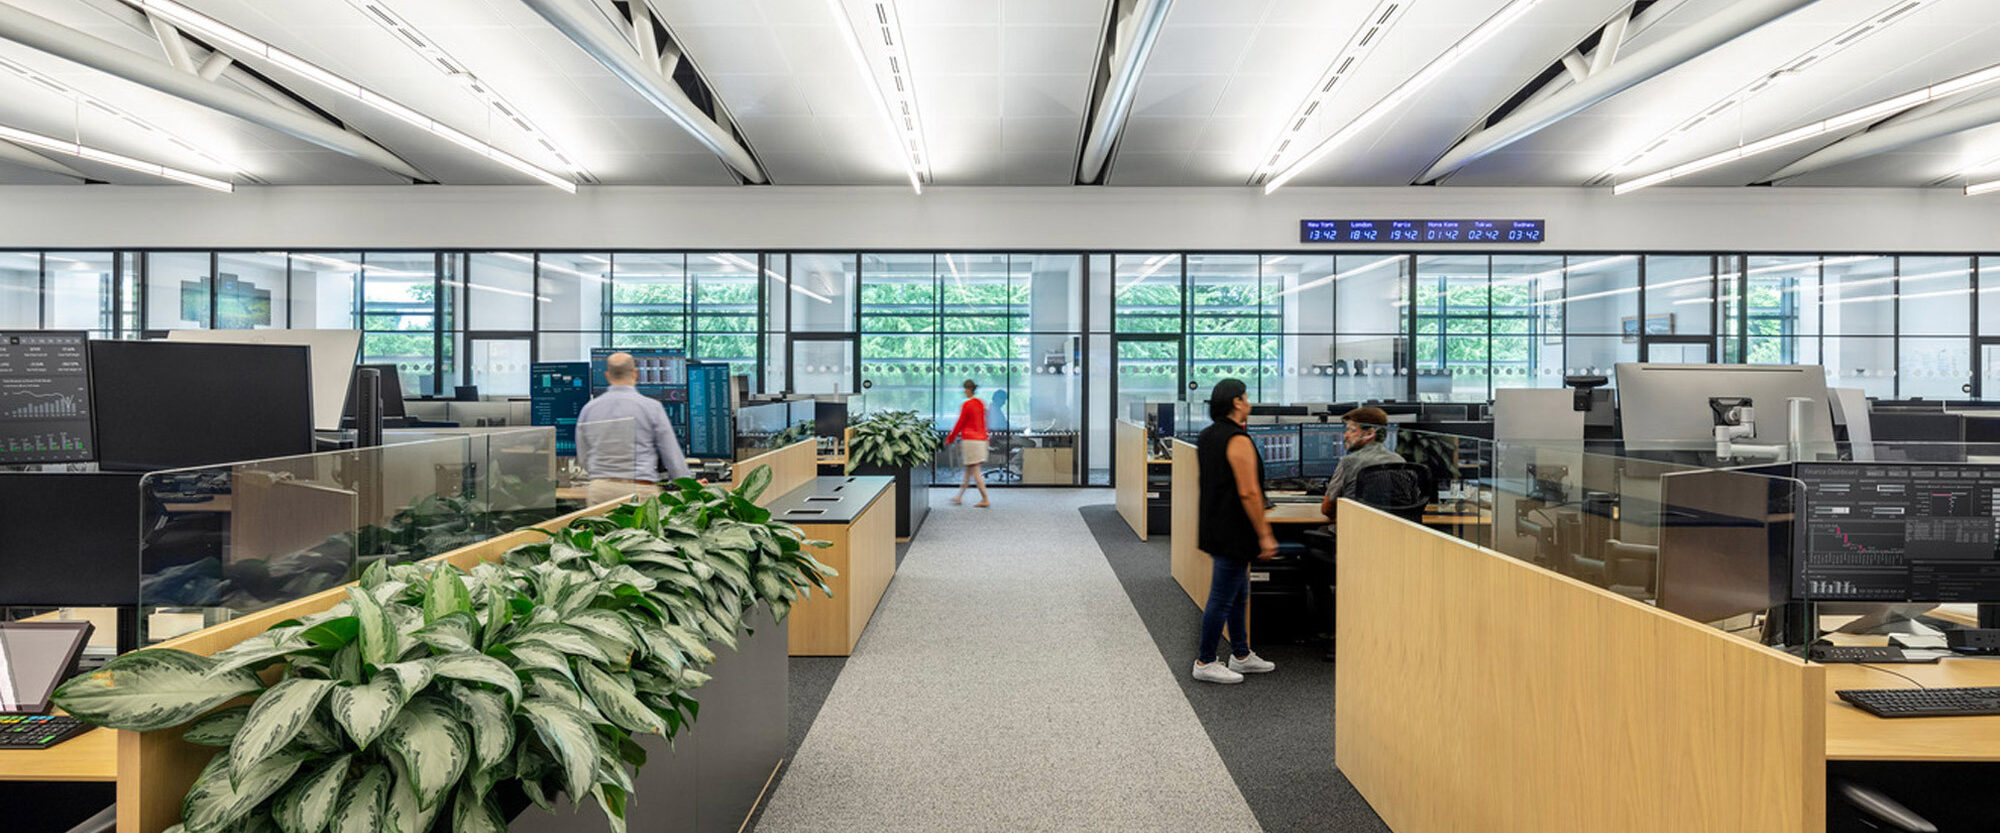 Modern office space featuring sleek, linear lighting overhead, modular workstations with wood panel dividers, ergonomic chairs, and thoughtful incorporation of greenery enhancing the workspace environment.